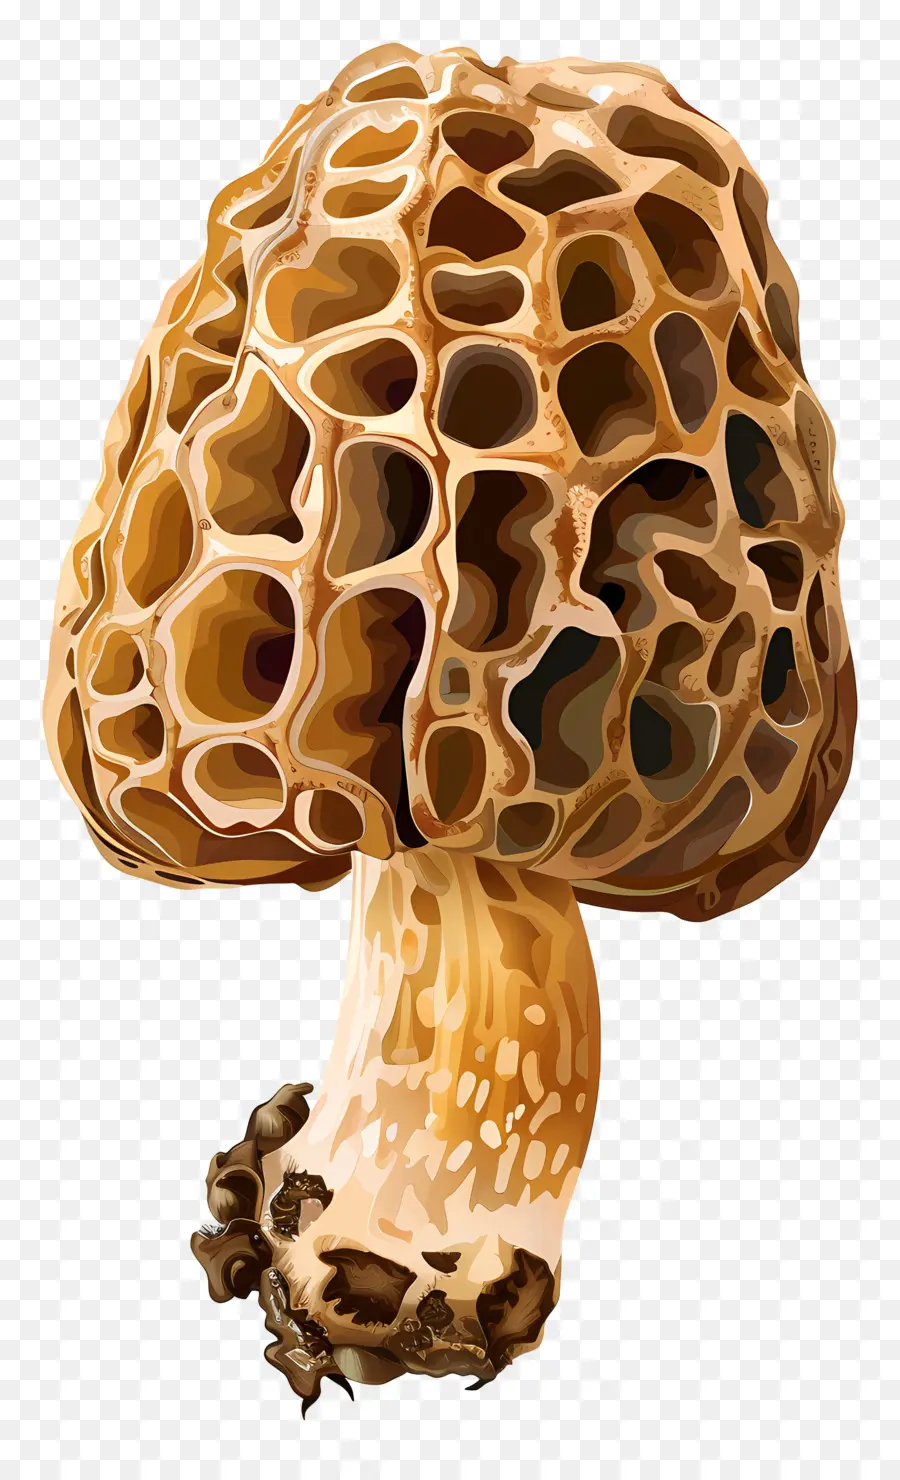 Morille，Champignons PNG